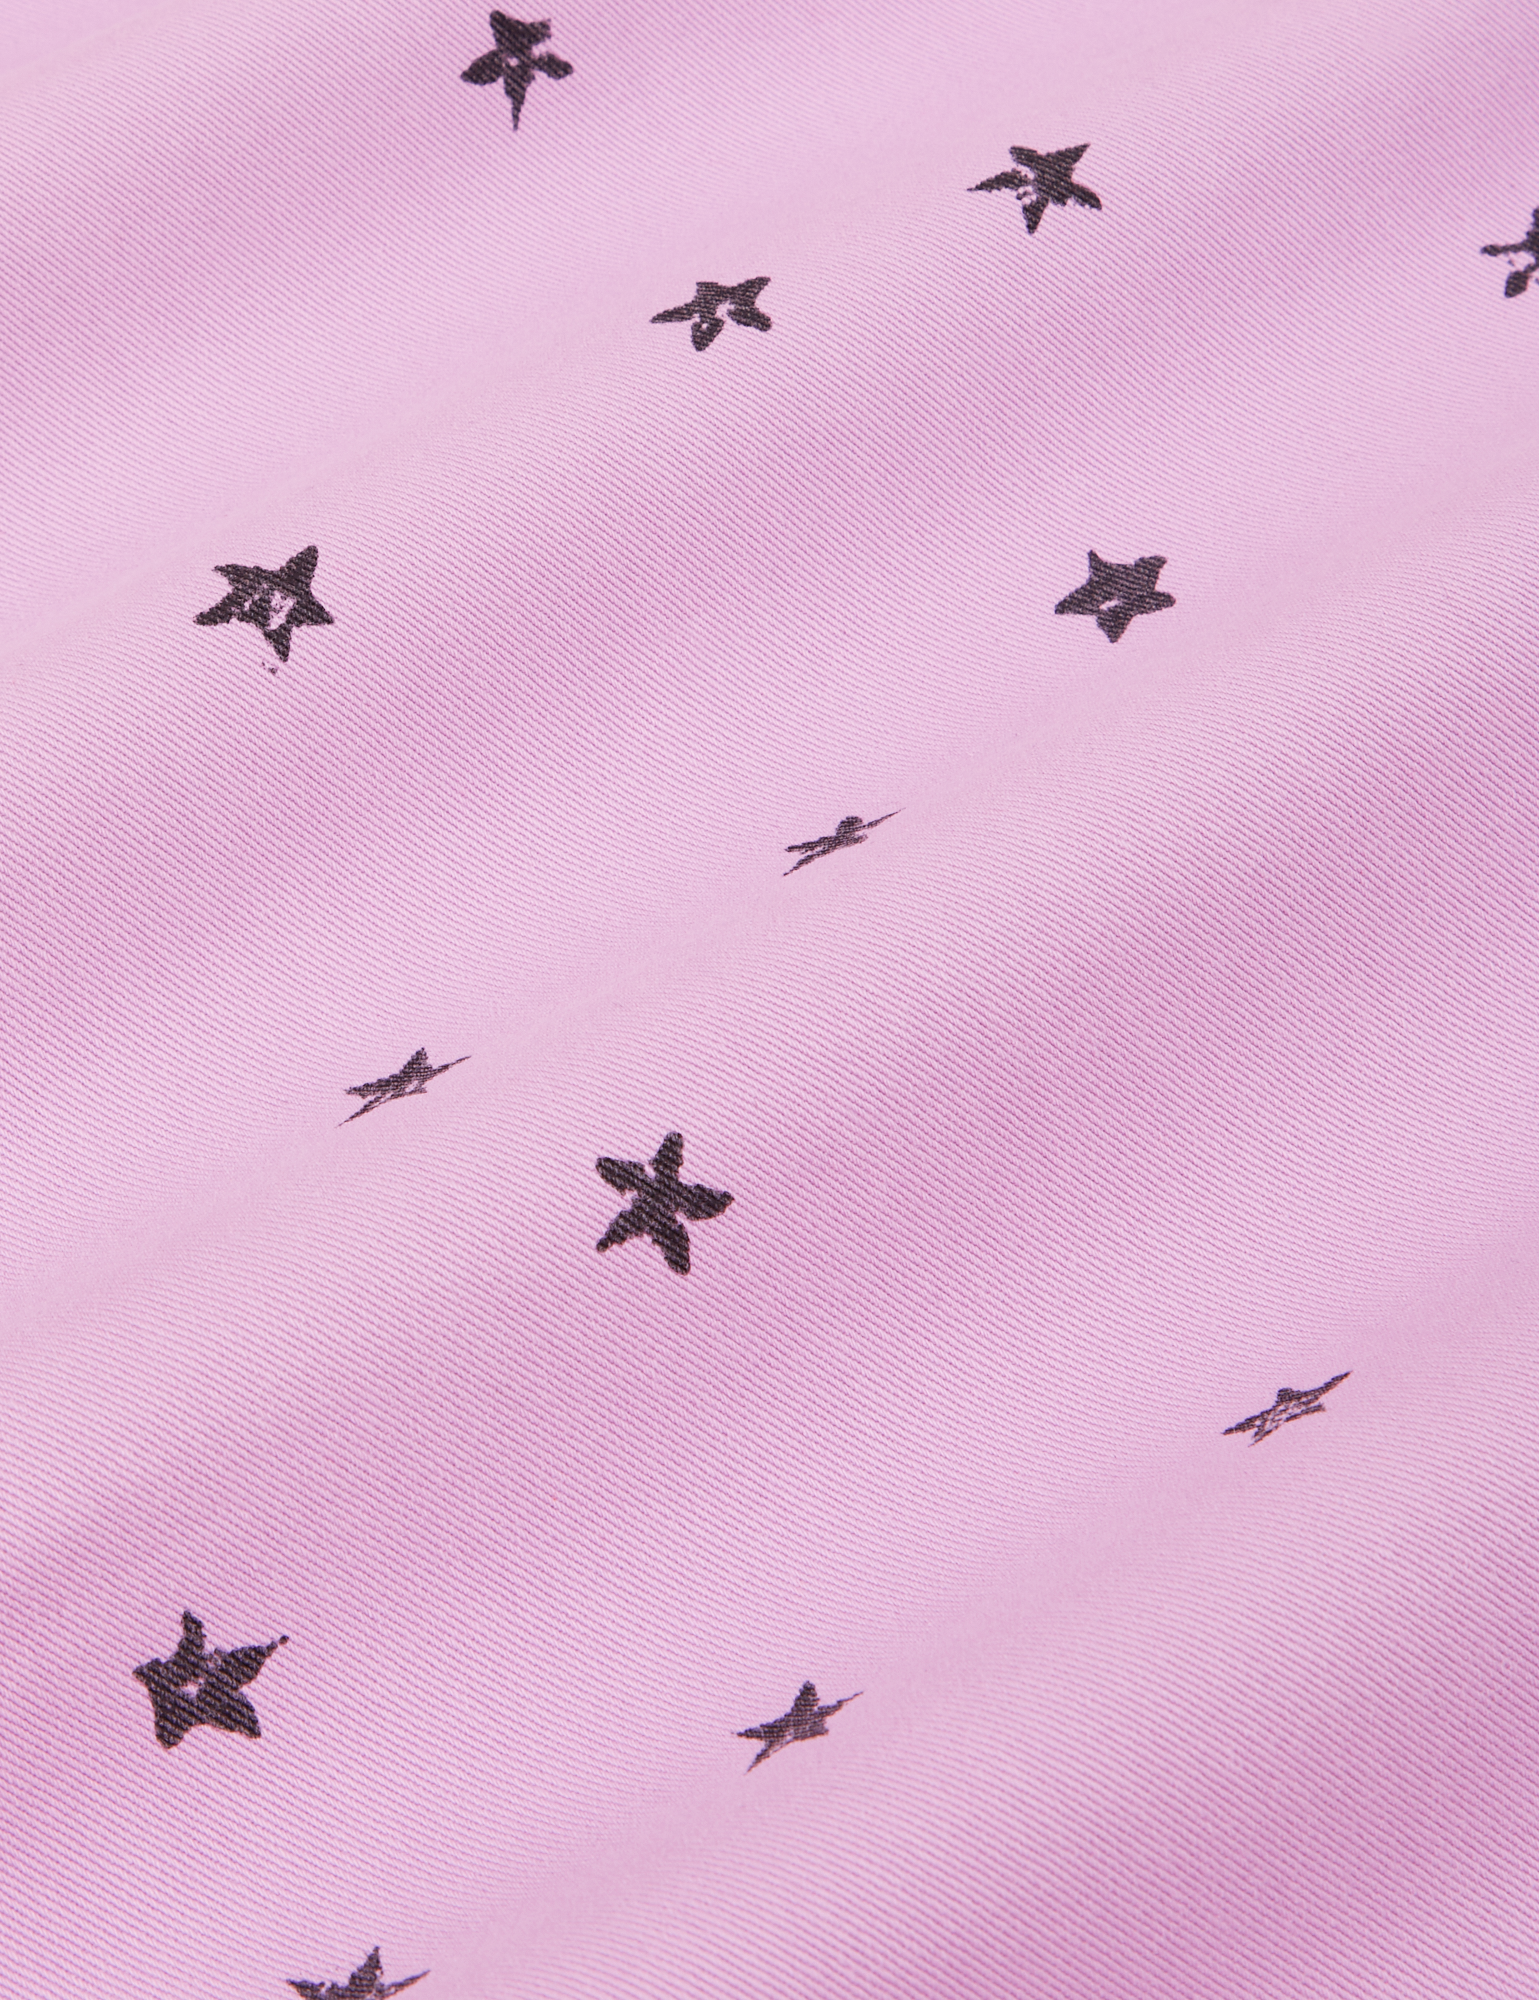 Star Bell Bottoms in Lilac Purple fabric detail. Handstamped little stars on the fabric.